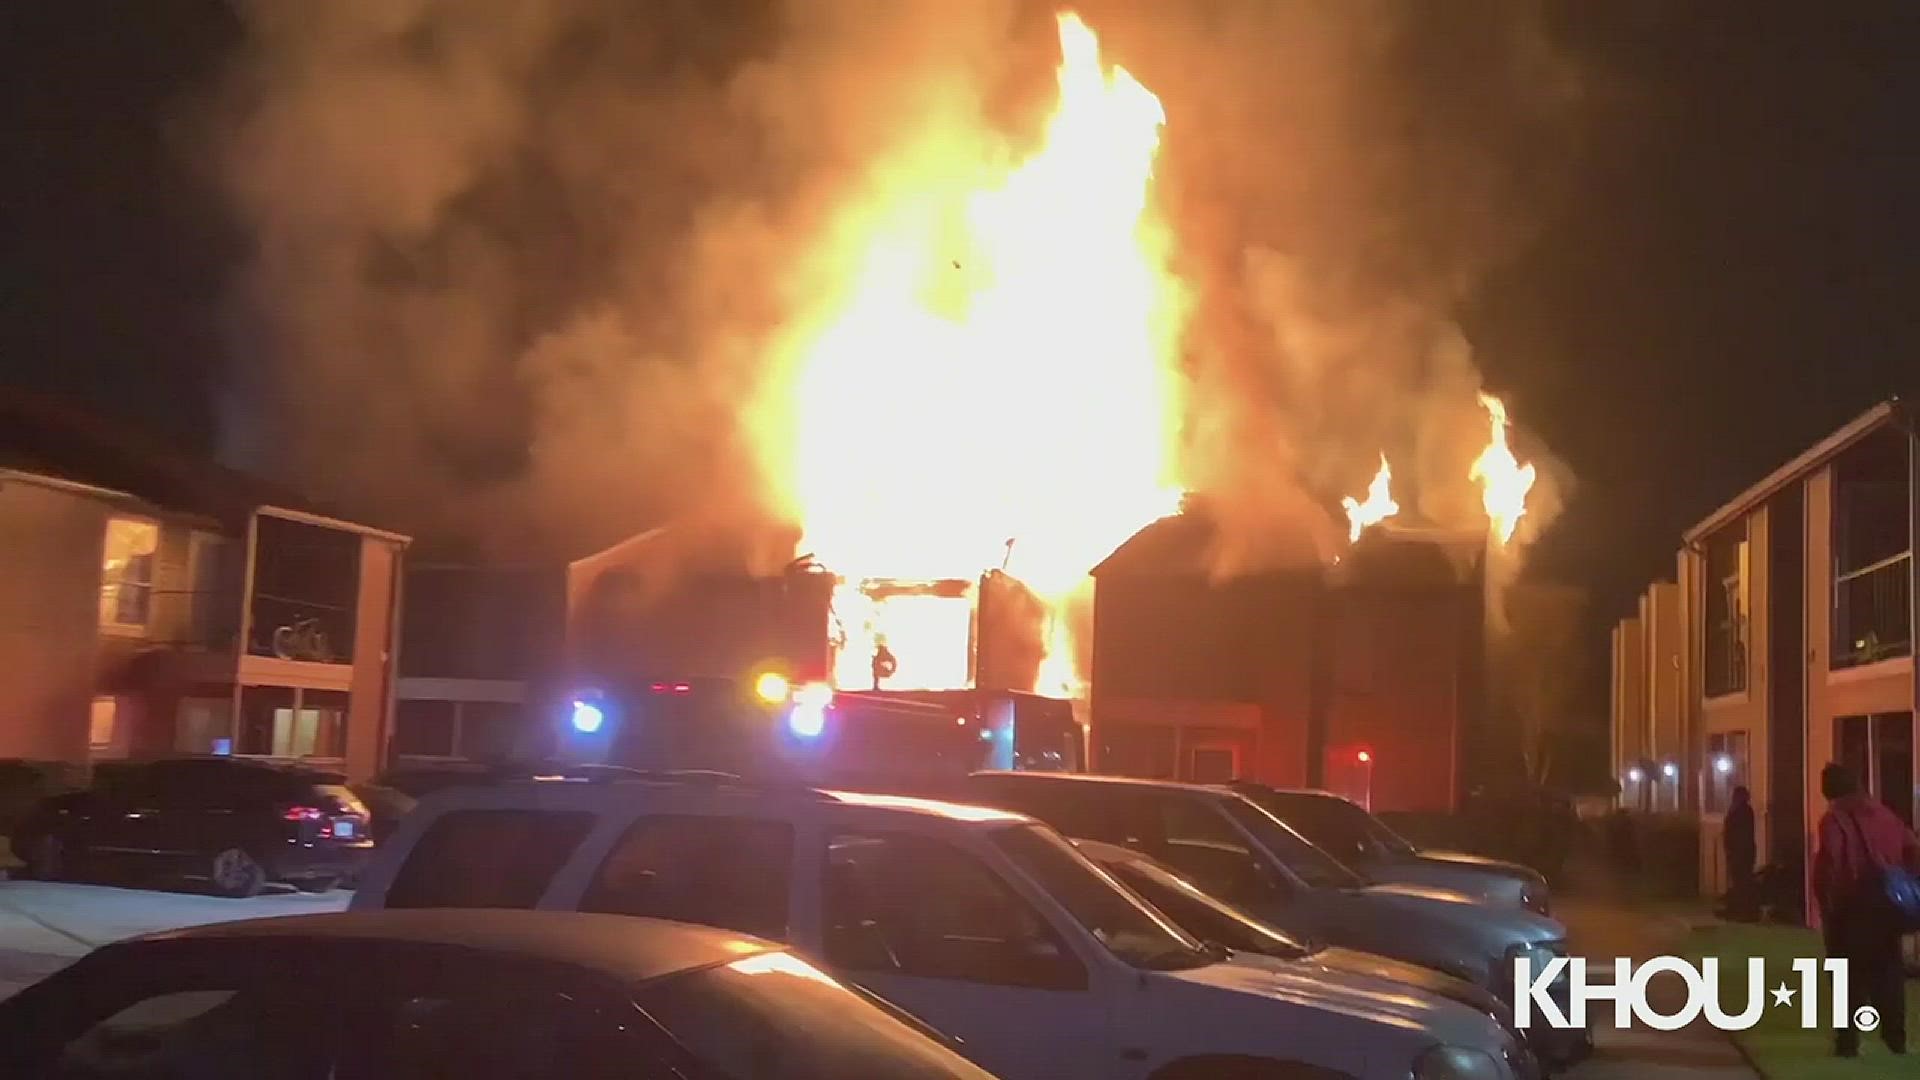 Fire crews had their hands full with a two-alarm apartment fire in southwest Houston Tuesday night.